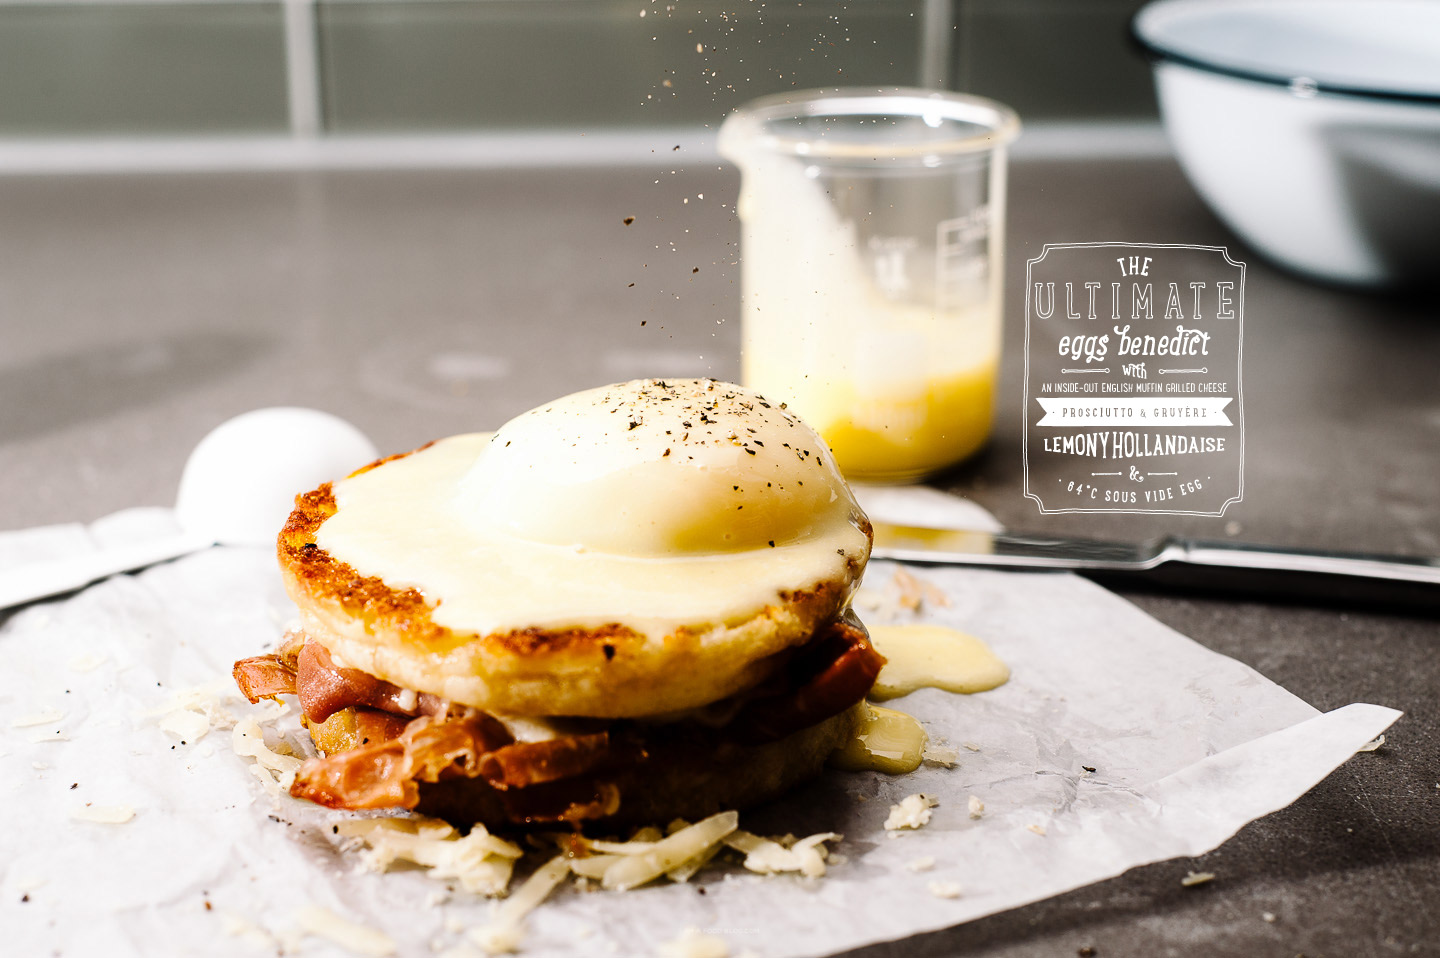 grilled cheese eggs benny recipe - www.iamafoodblog.com